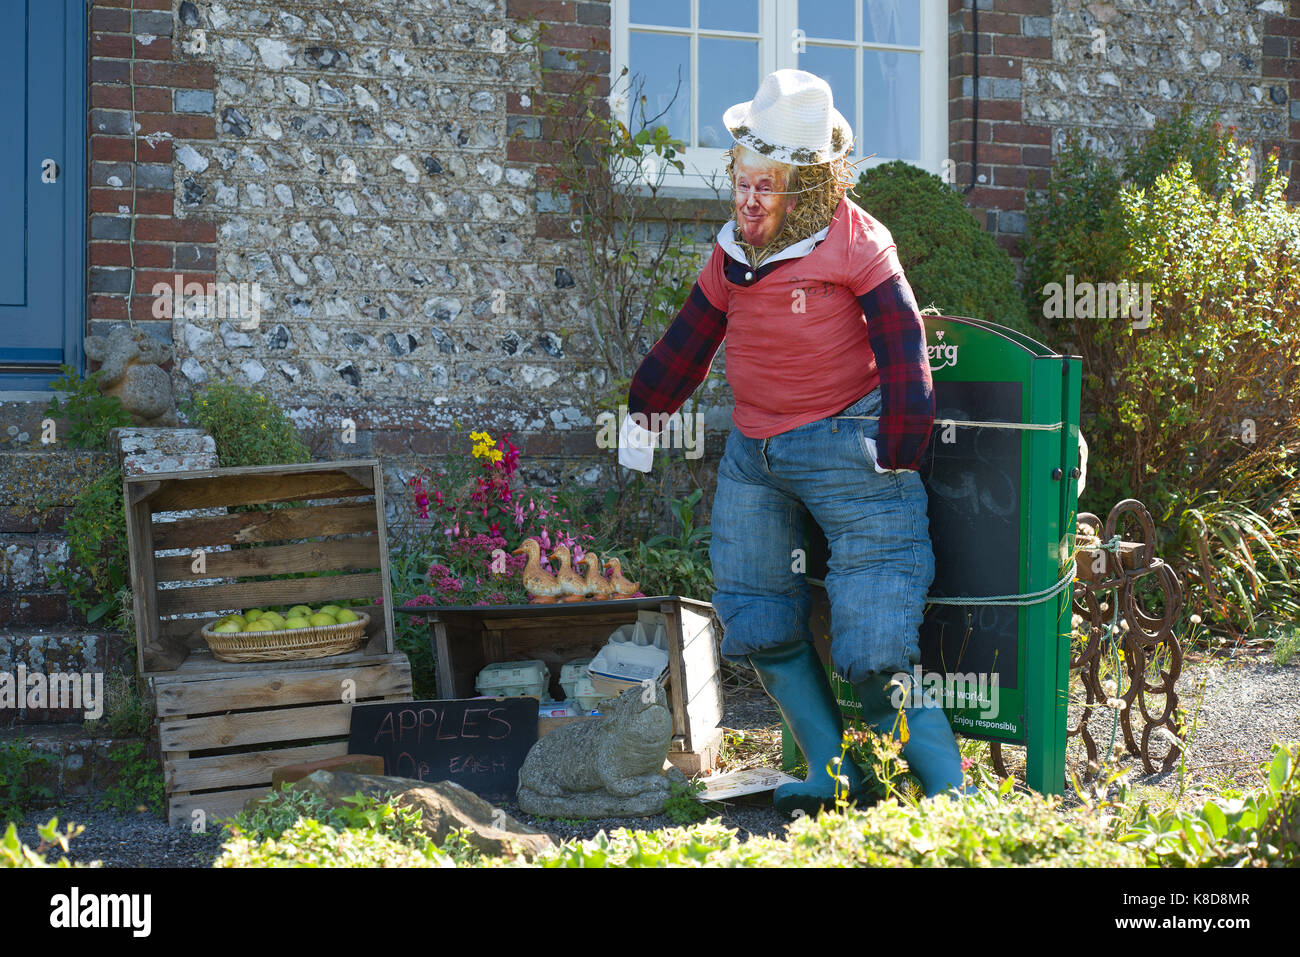 Scarecrow with Donald Trump mask Stock Photo